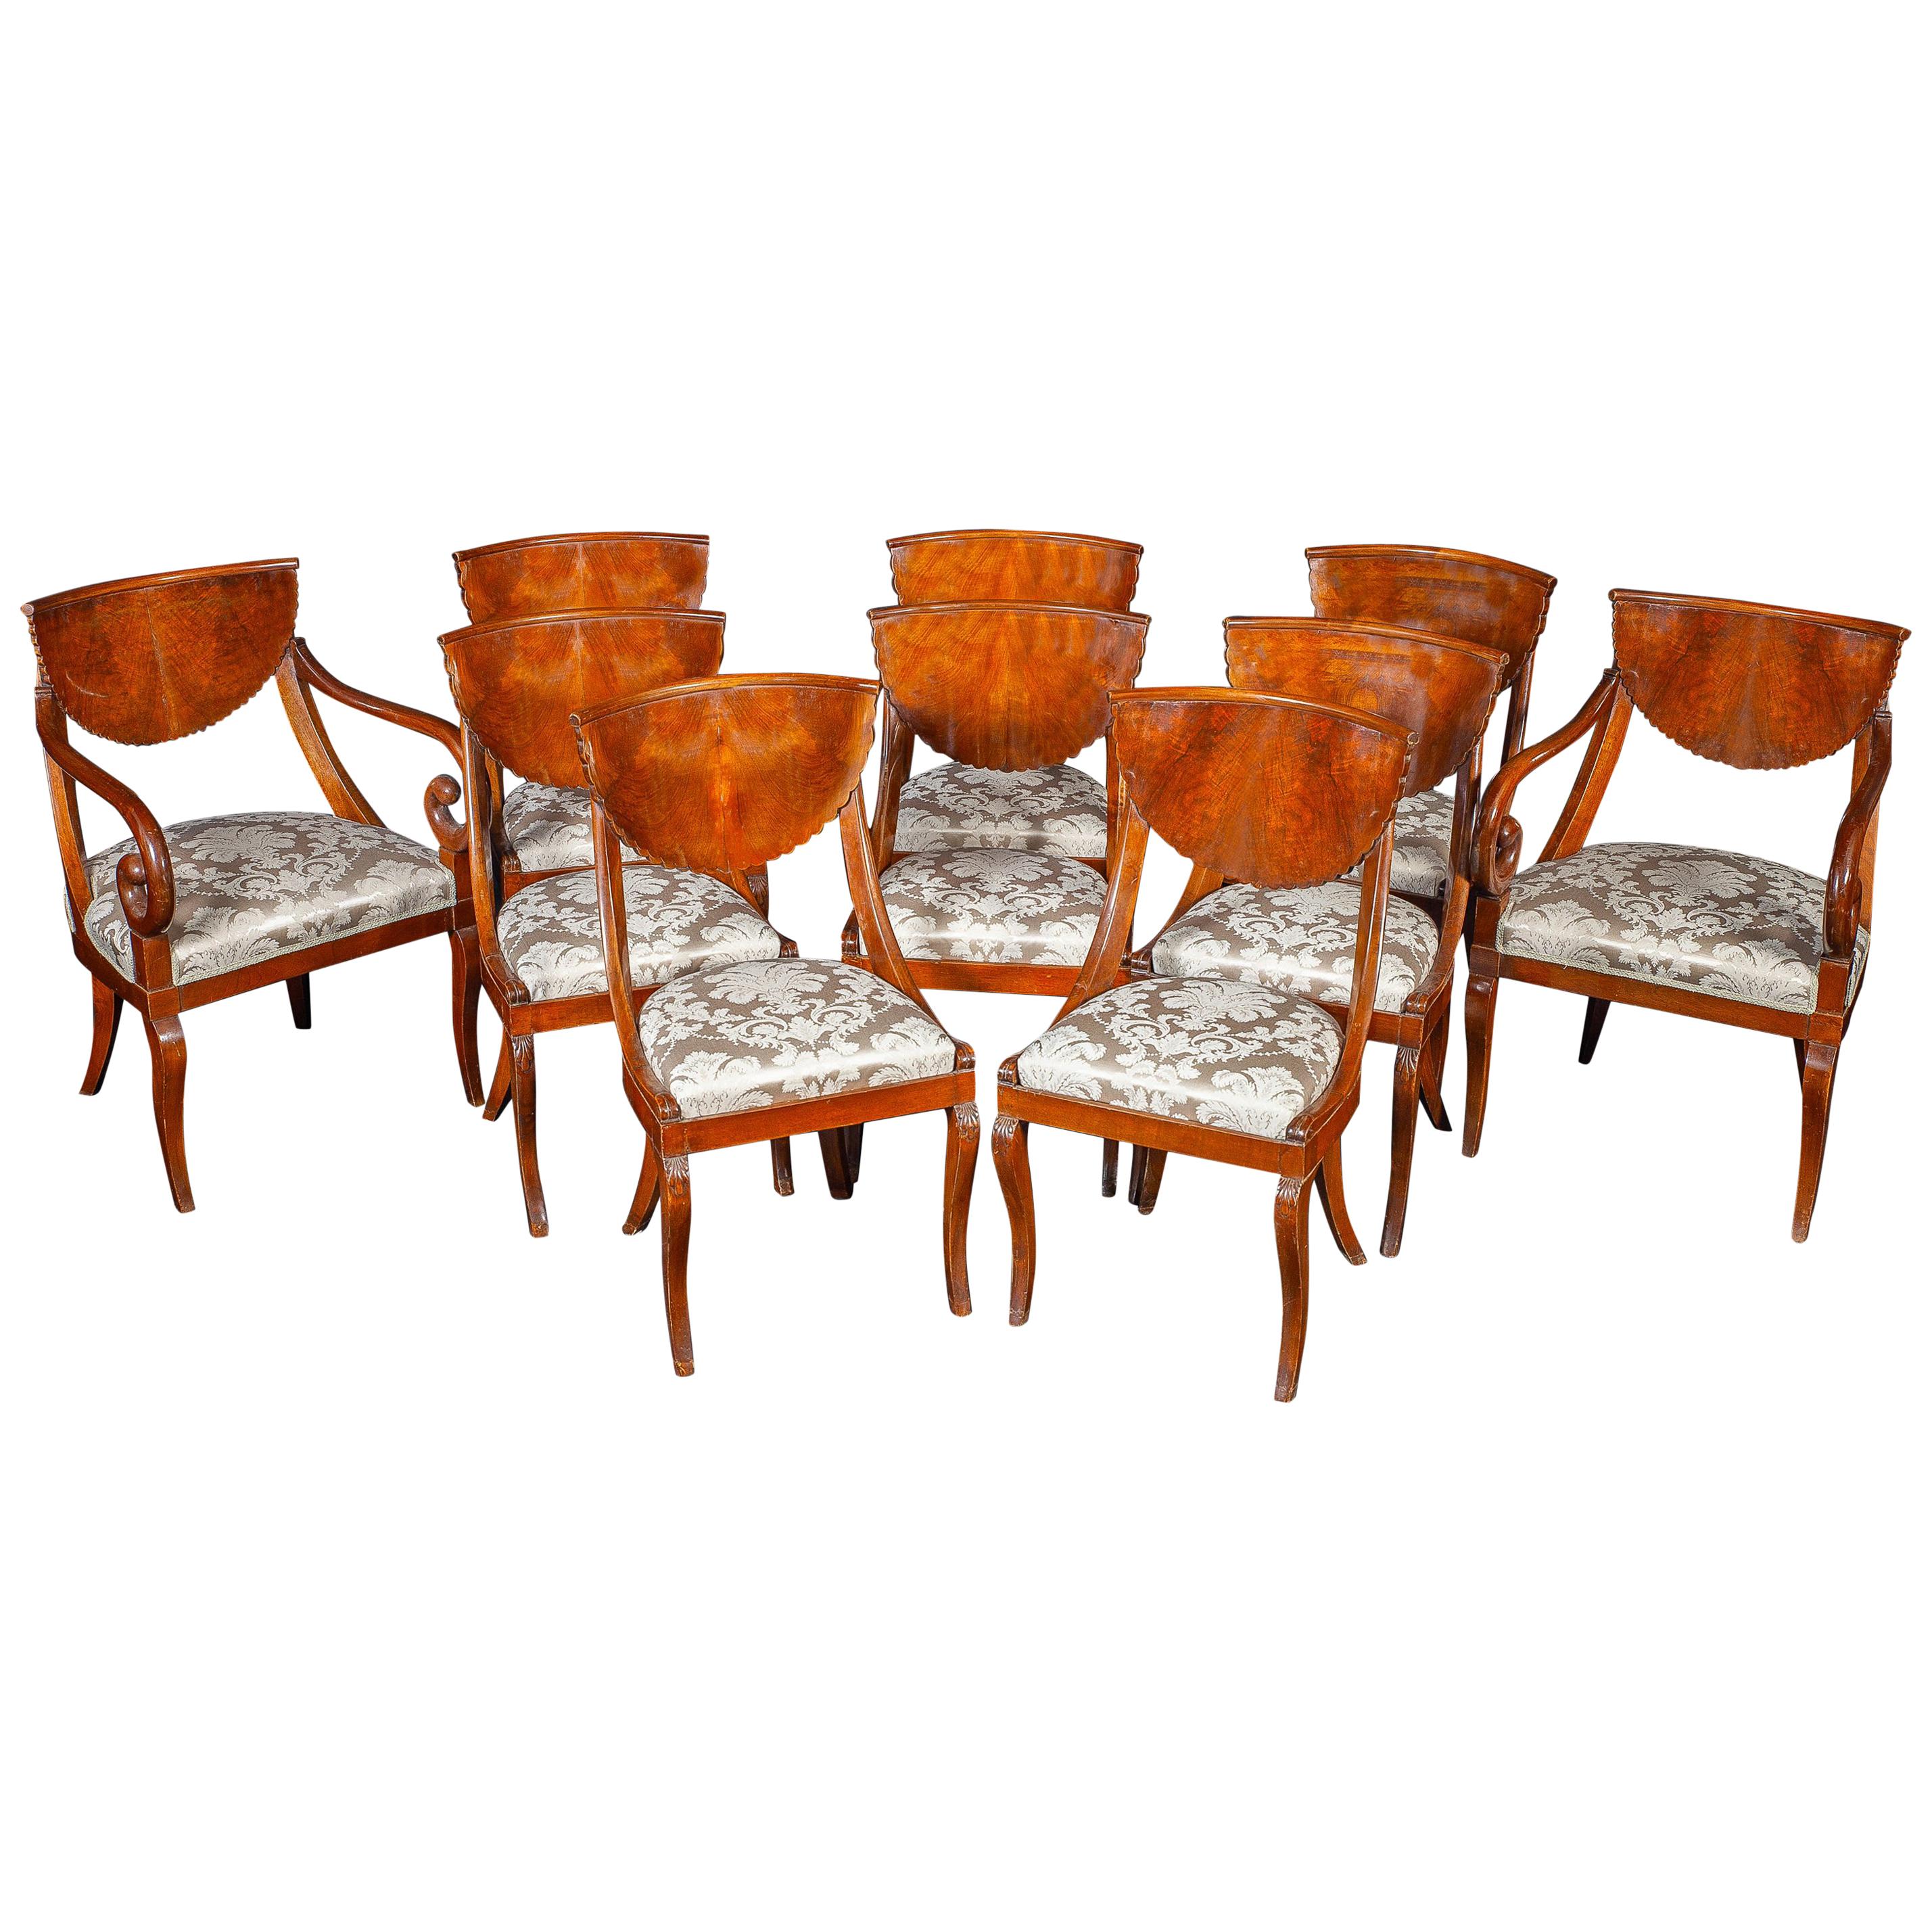 Dining Room Set of Eight Italian Chairs and a Pair of Armchairs, 1790